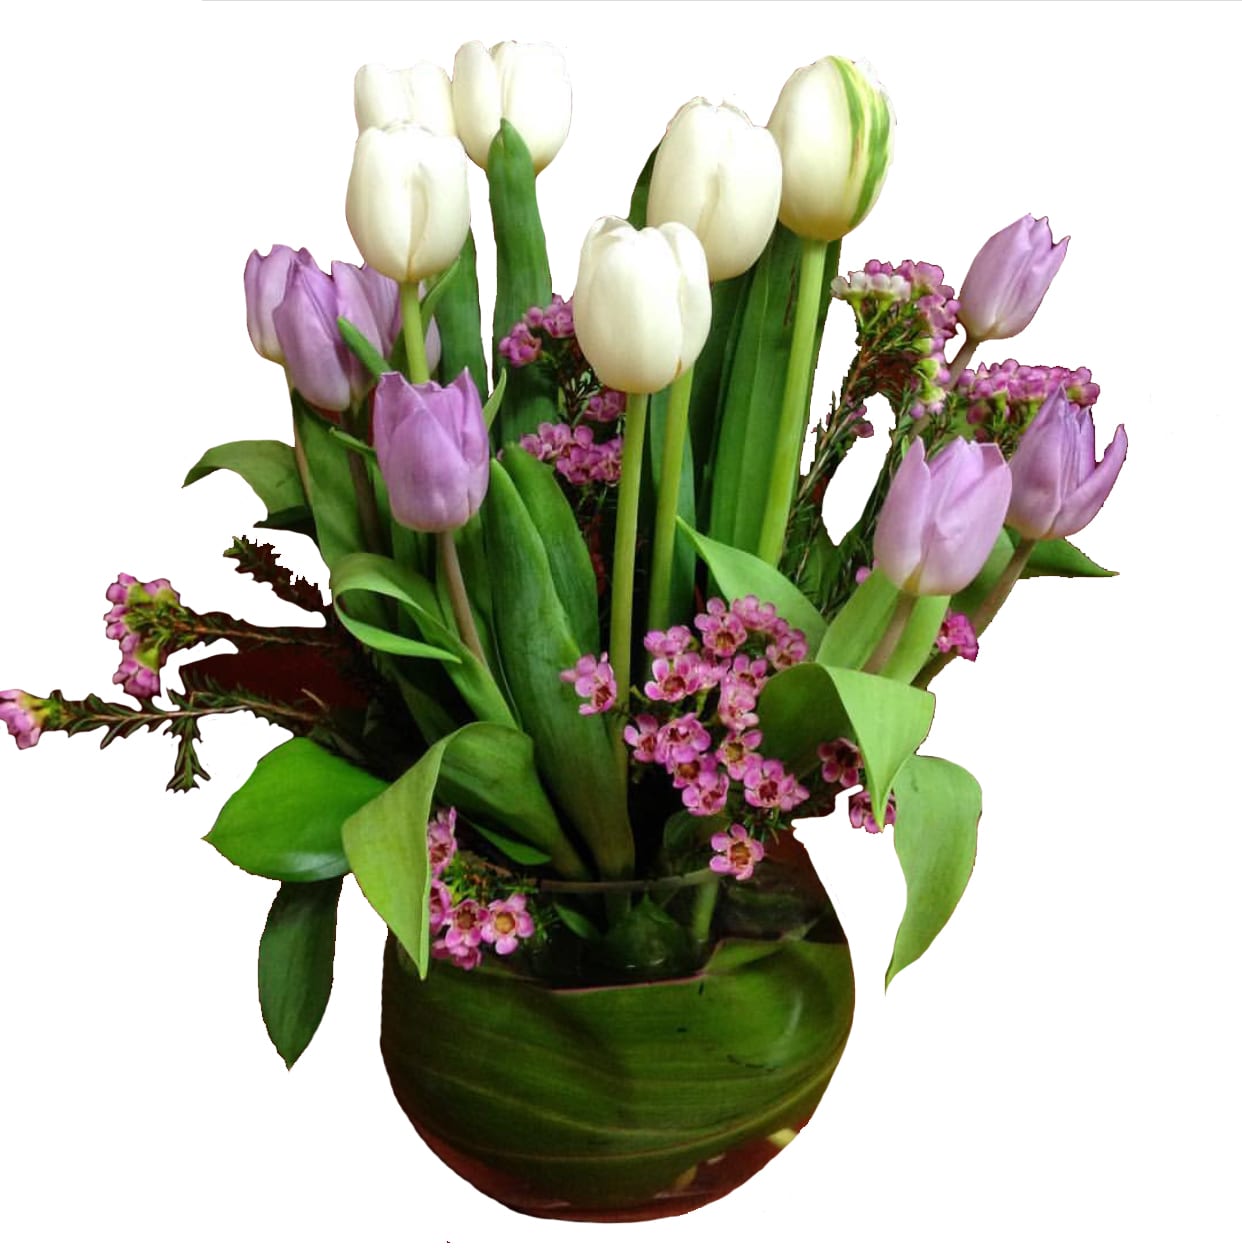 Spring Tulip - Glass vase arrangement. May included lavender and white tulips, waxflower filler. Please note that that the tulips colors may be substituted if white and lavender aren't available. 